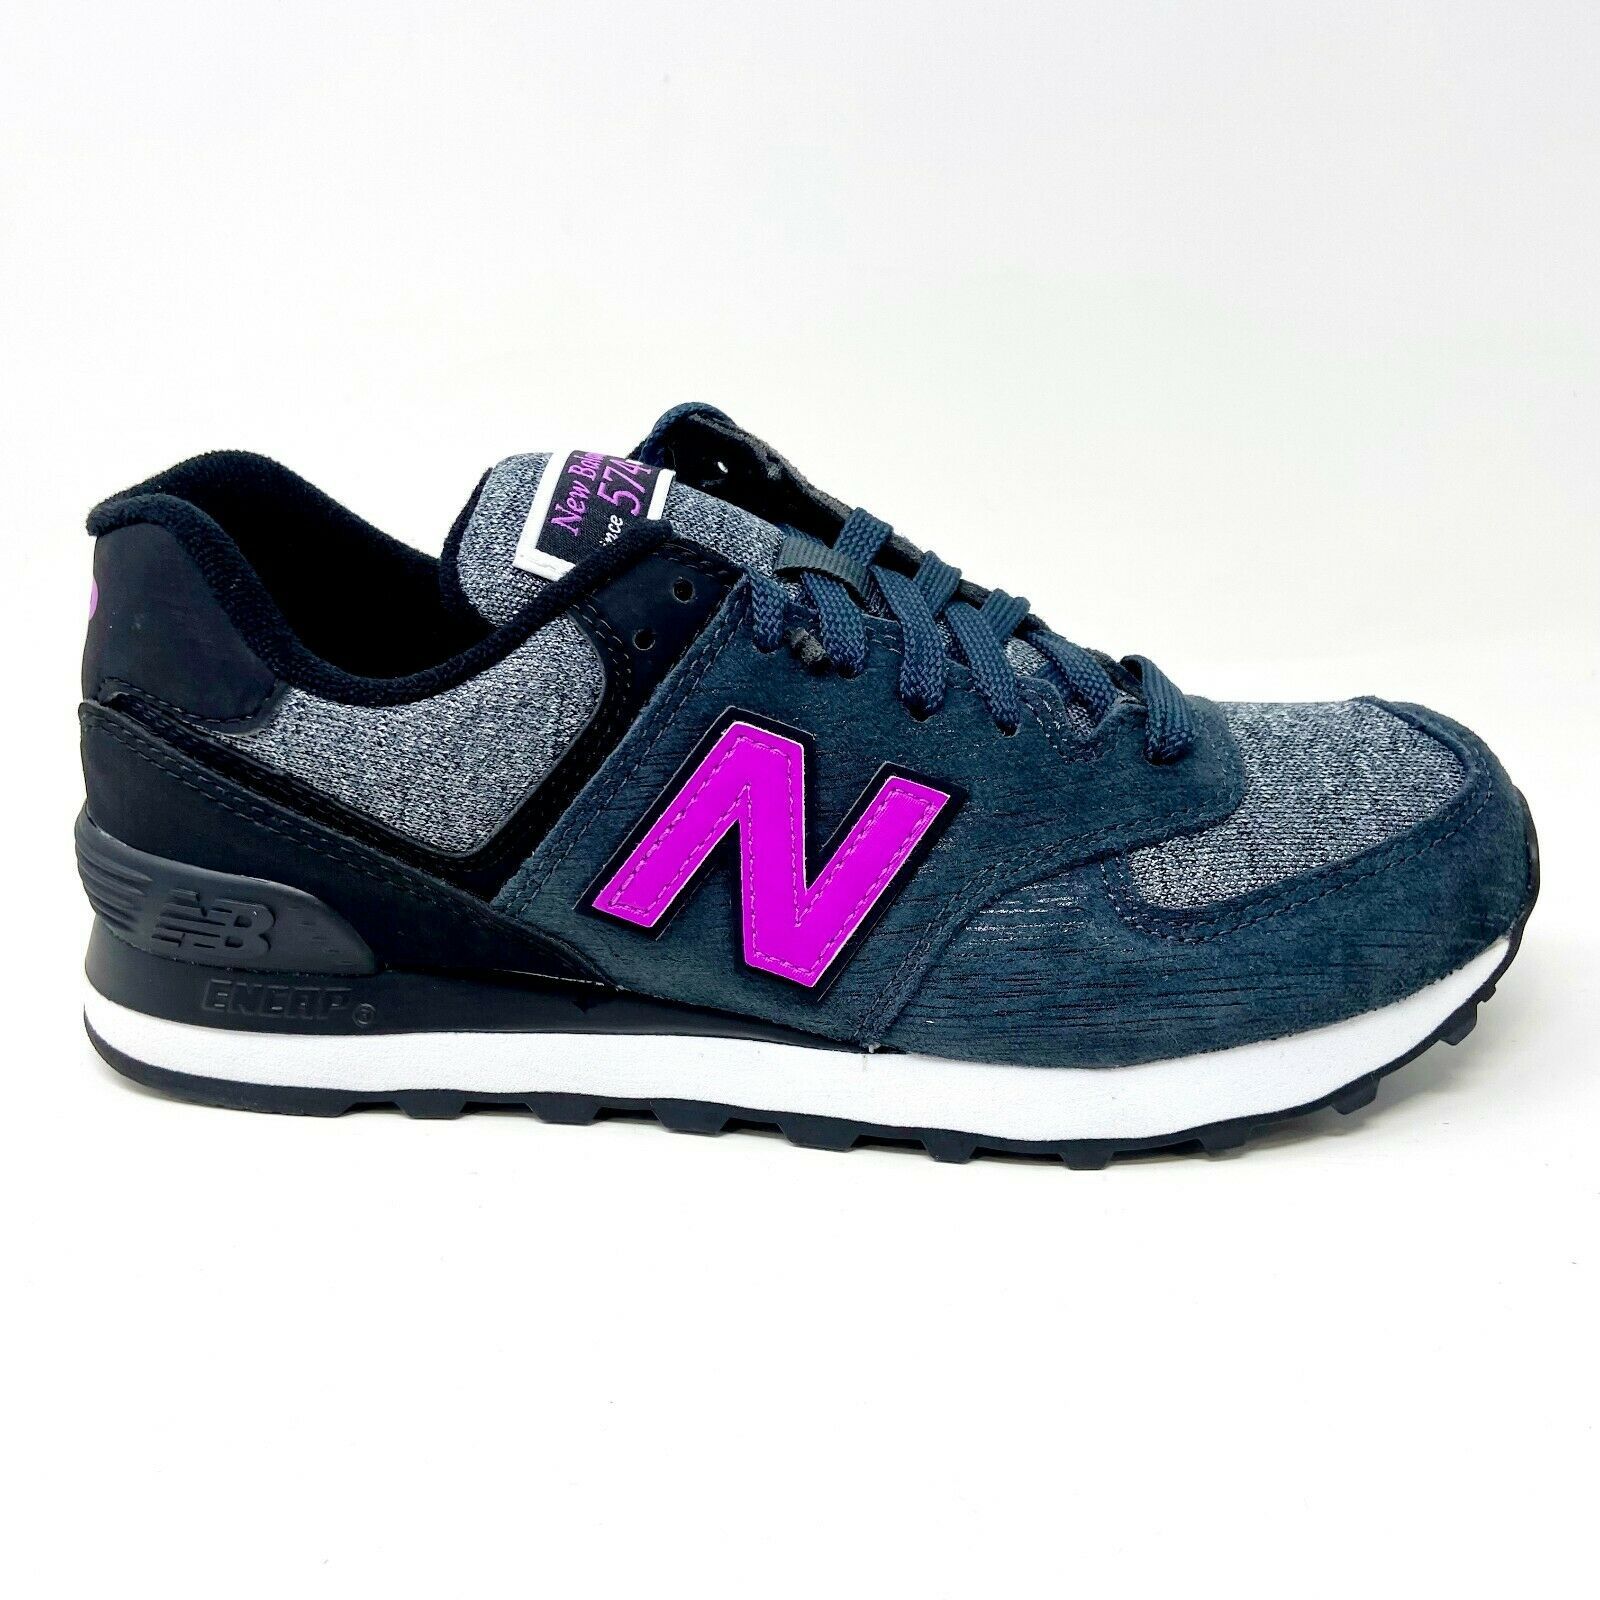 New Balance 574 Classic Winter Harbor Blue Womens Casual Sneakers WL574WHB